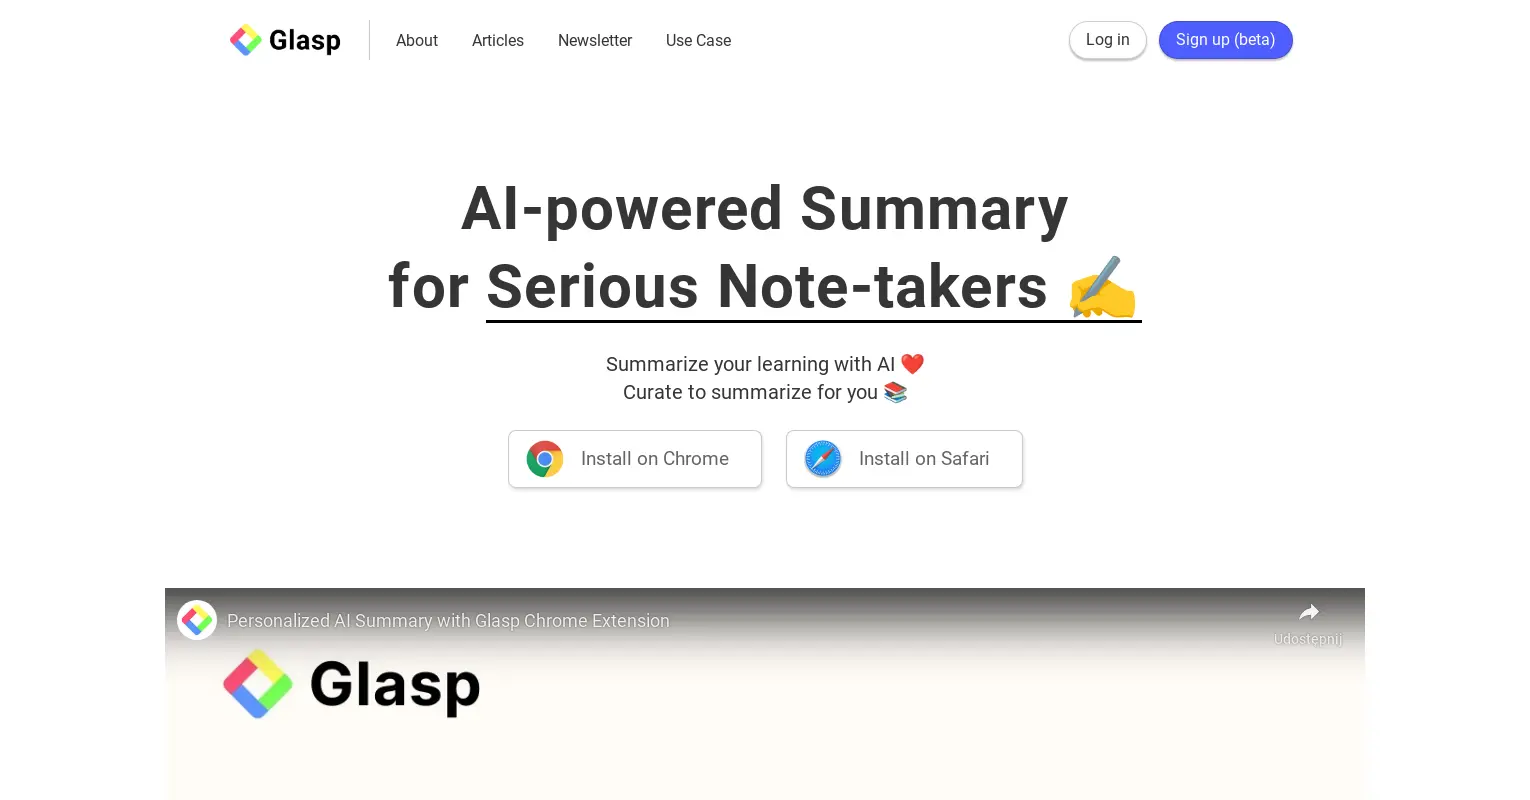 Personalized AI Summary by Glasp